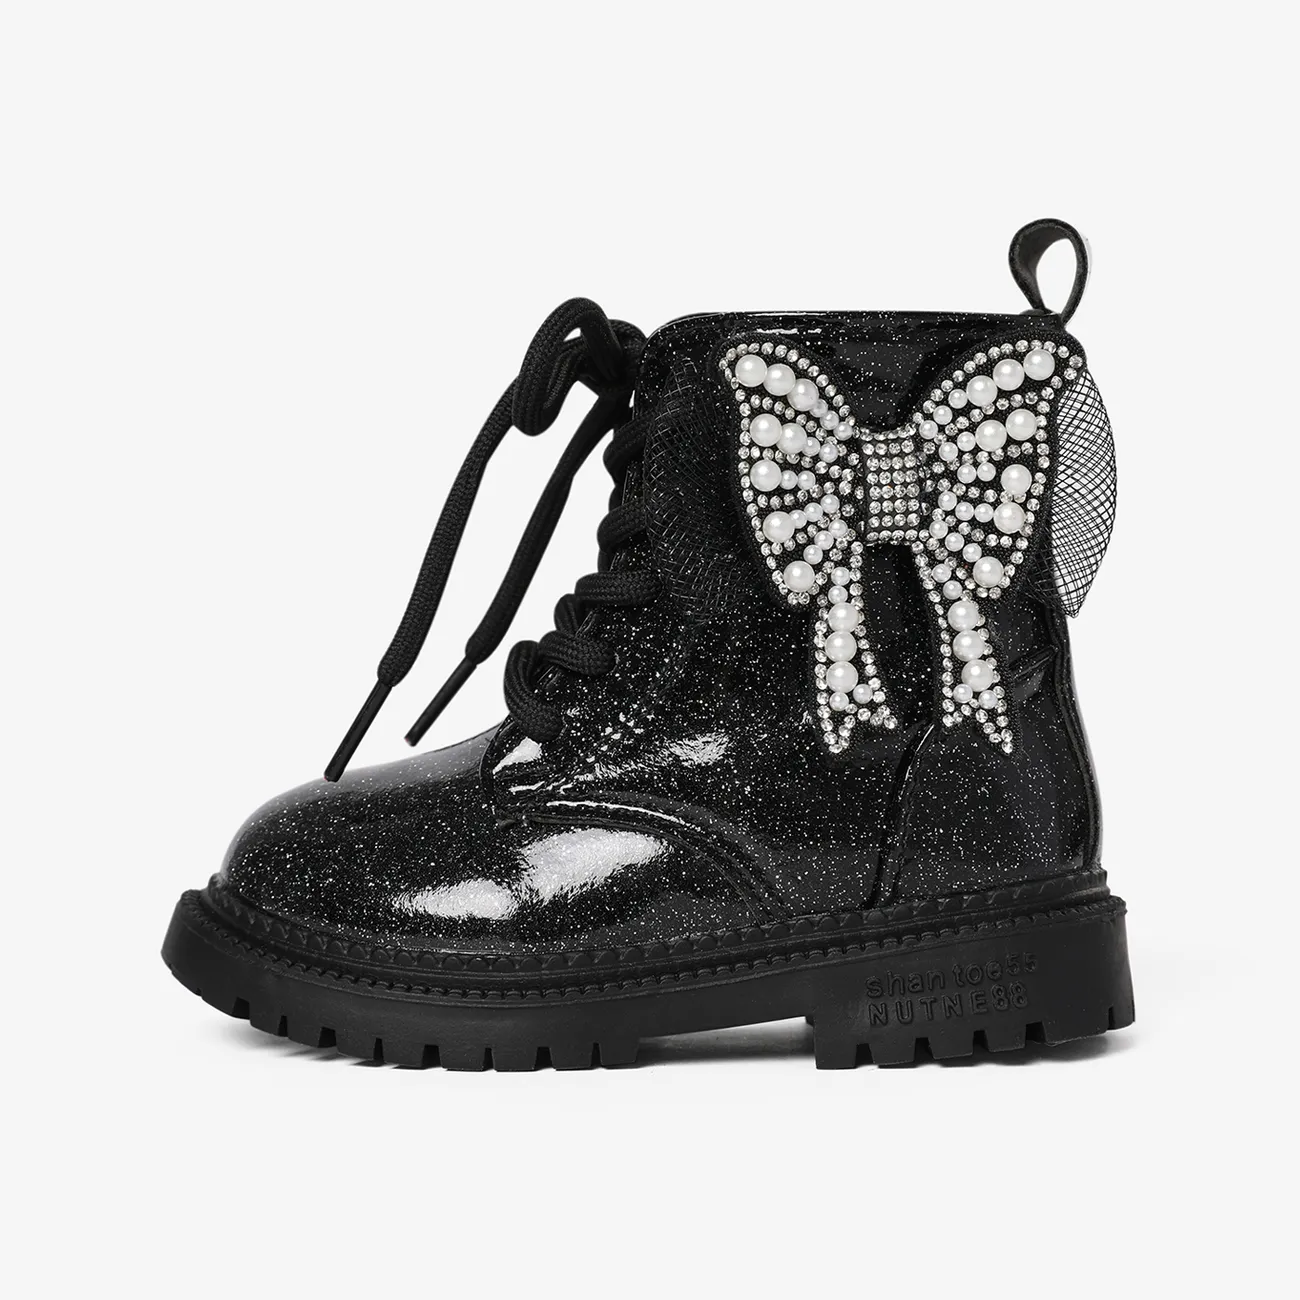  Toddler and Kids Beautiful Butterfly Decor Side Zipper Boots Black big image 1